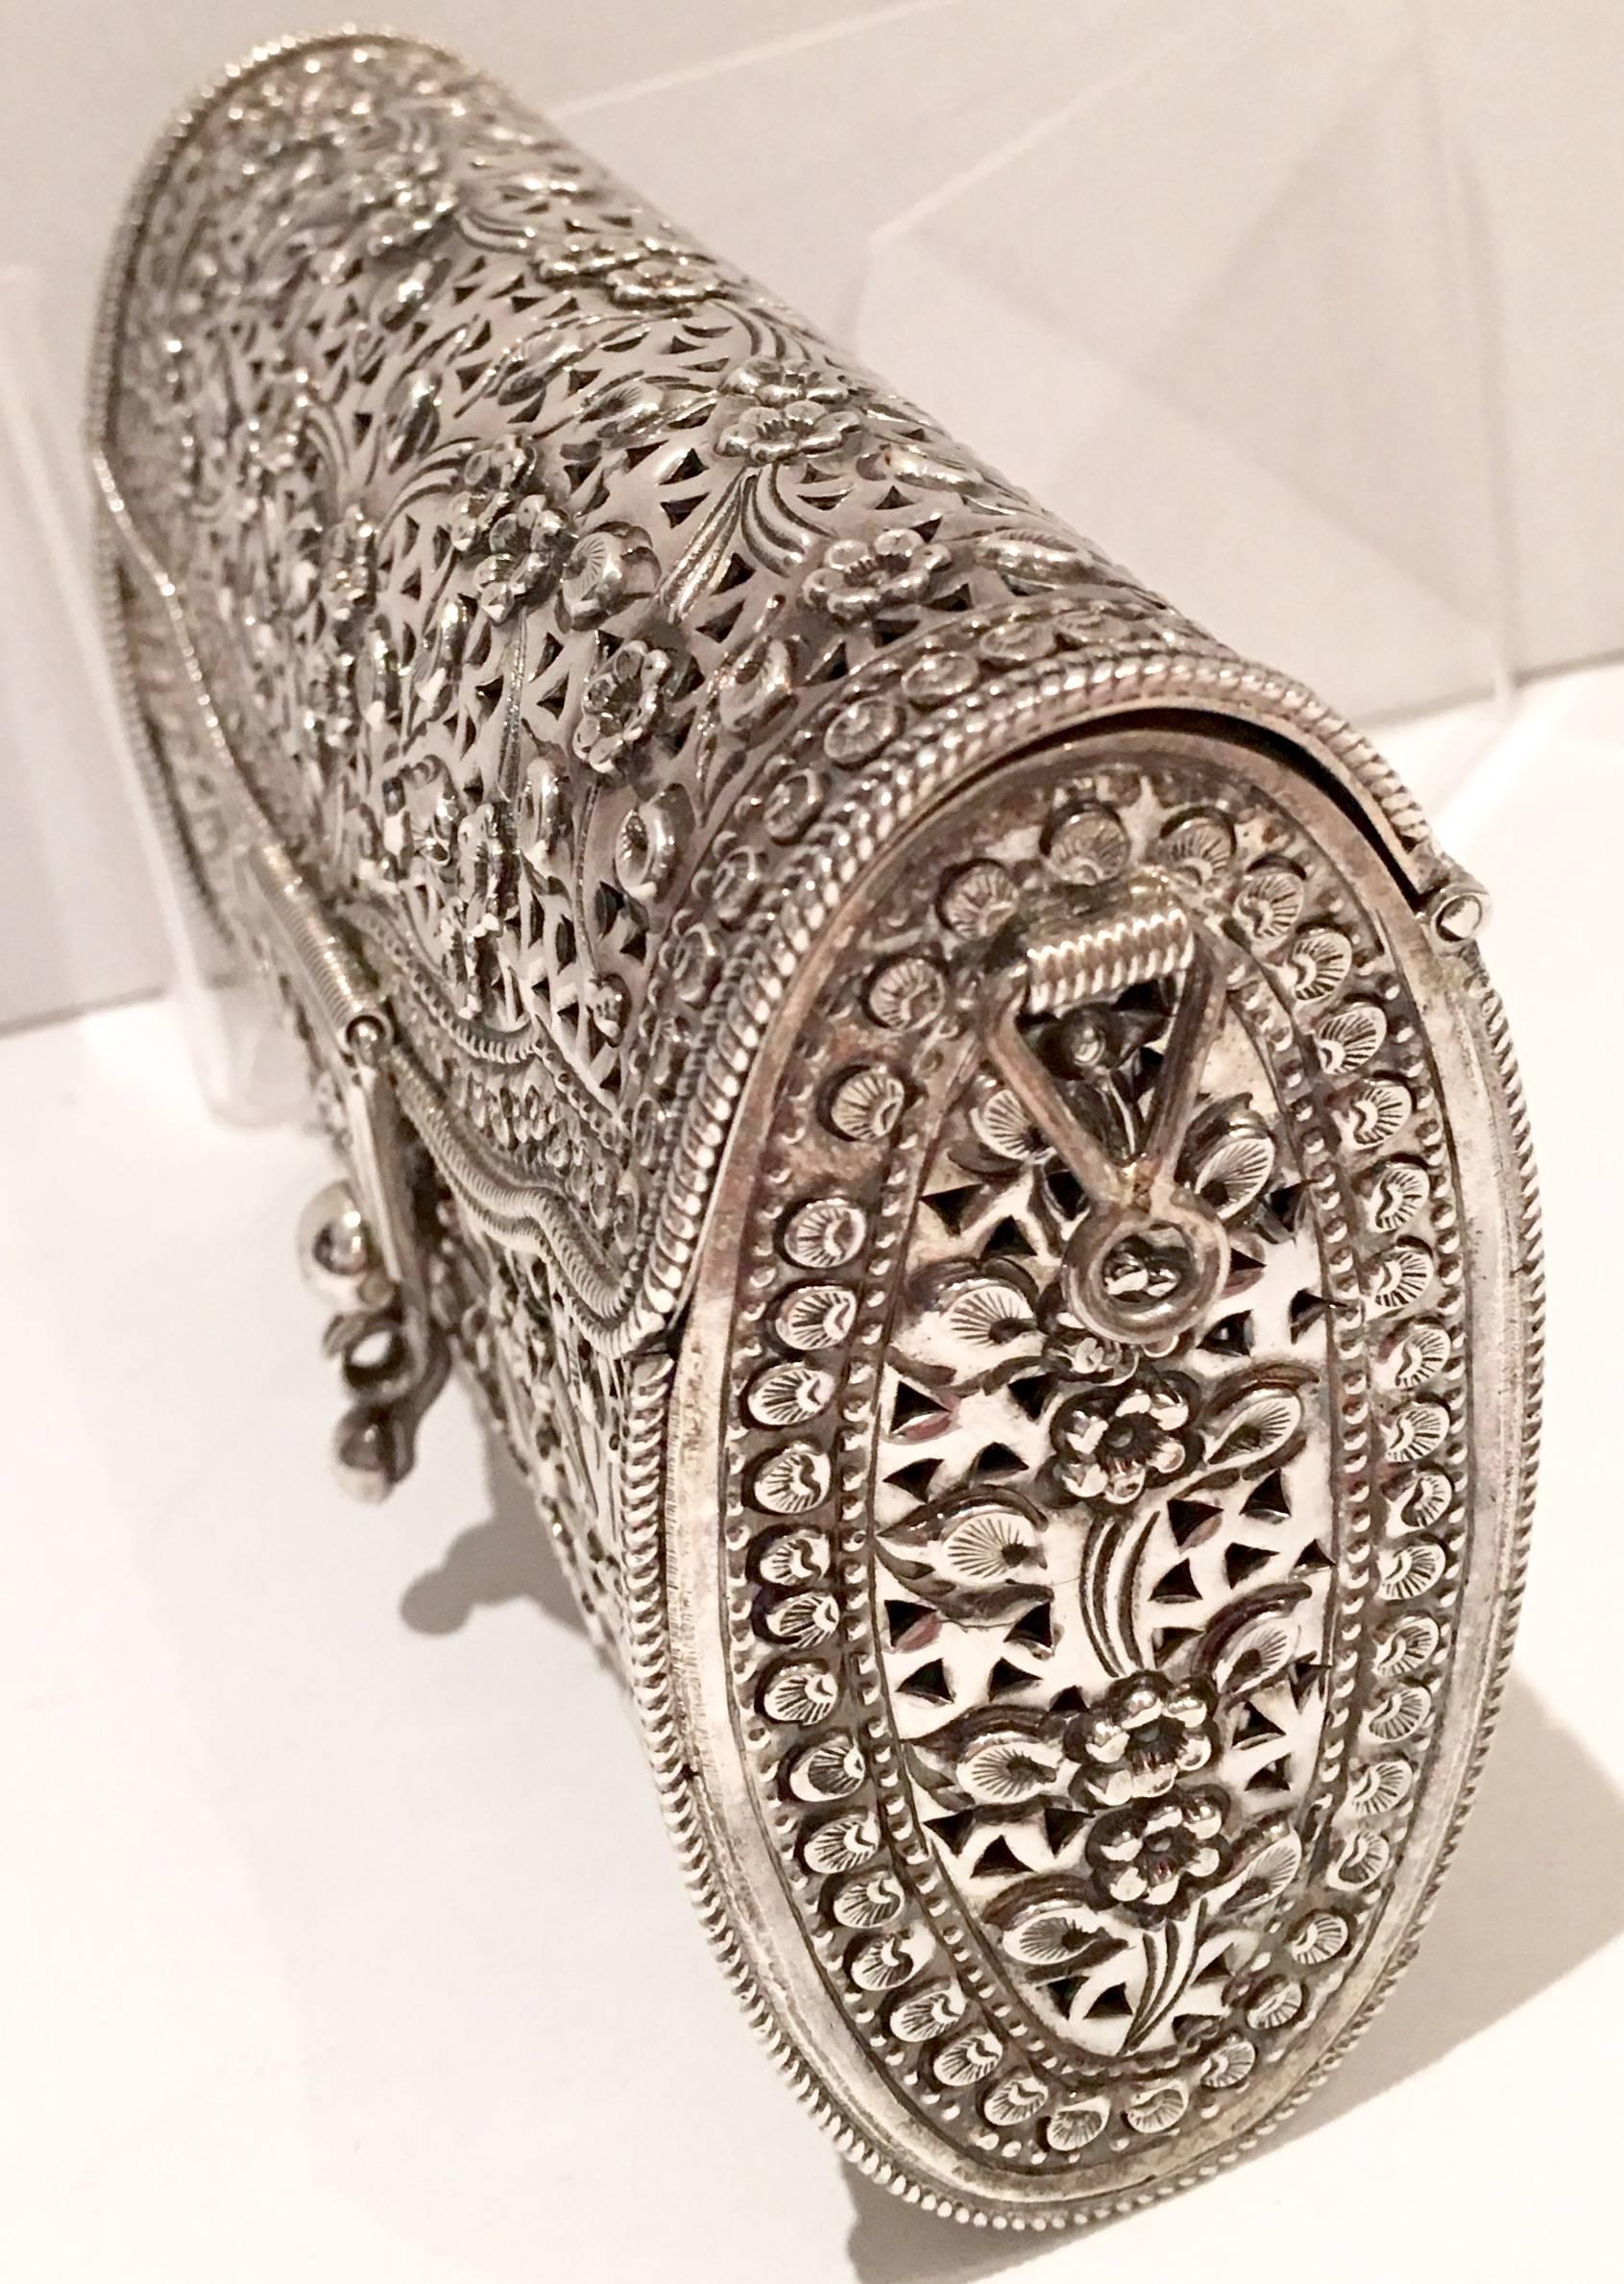 Vintage sterling 925 marked floral filigree silver work minaudiere handbag with detachable silver chain. Beaded detail throughout with beautiful etched detail on the bottom. Shoulder strap is optional and measures, 42" inches in length.
Signed